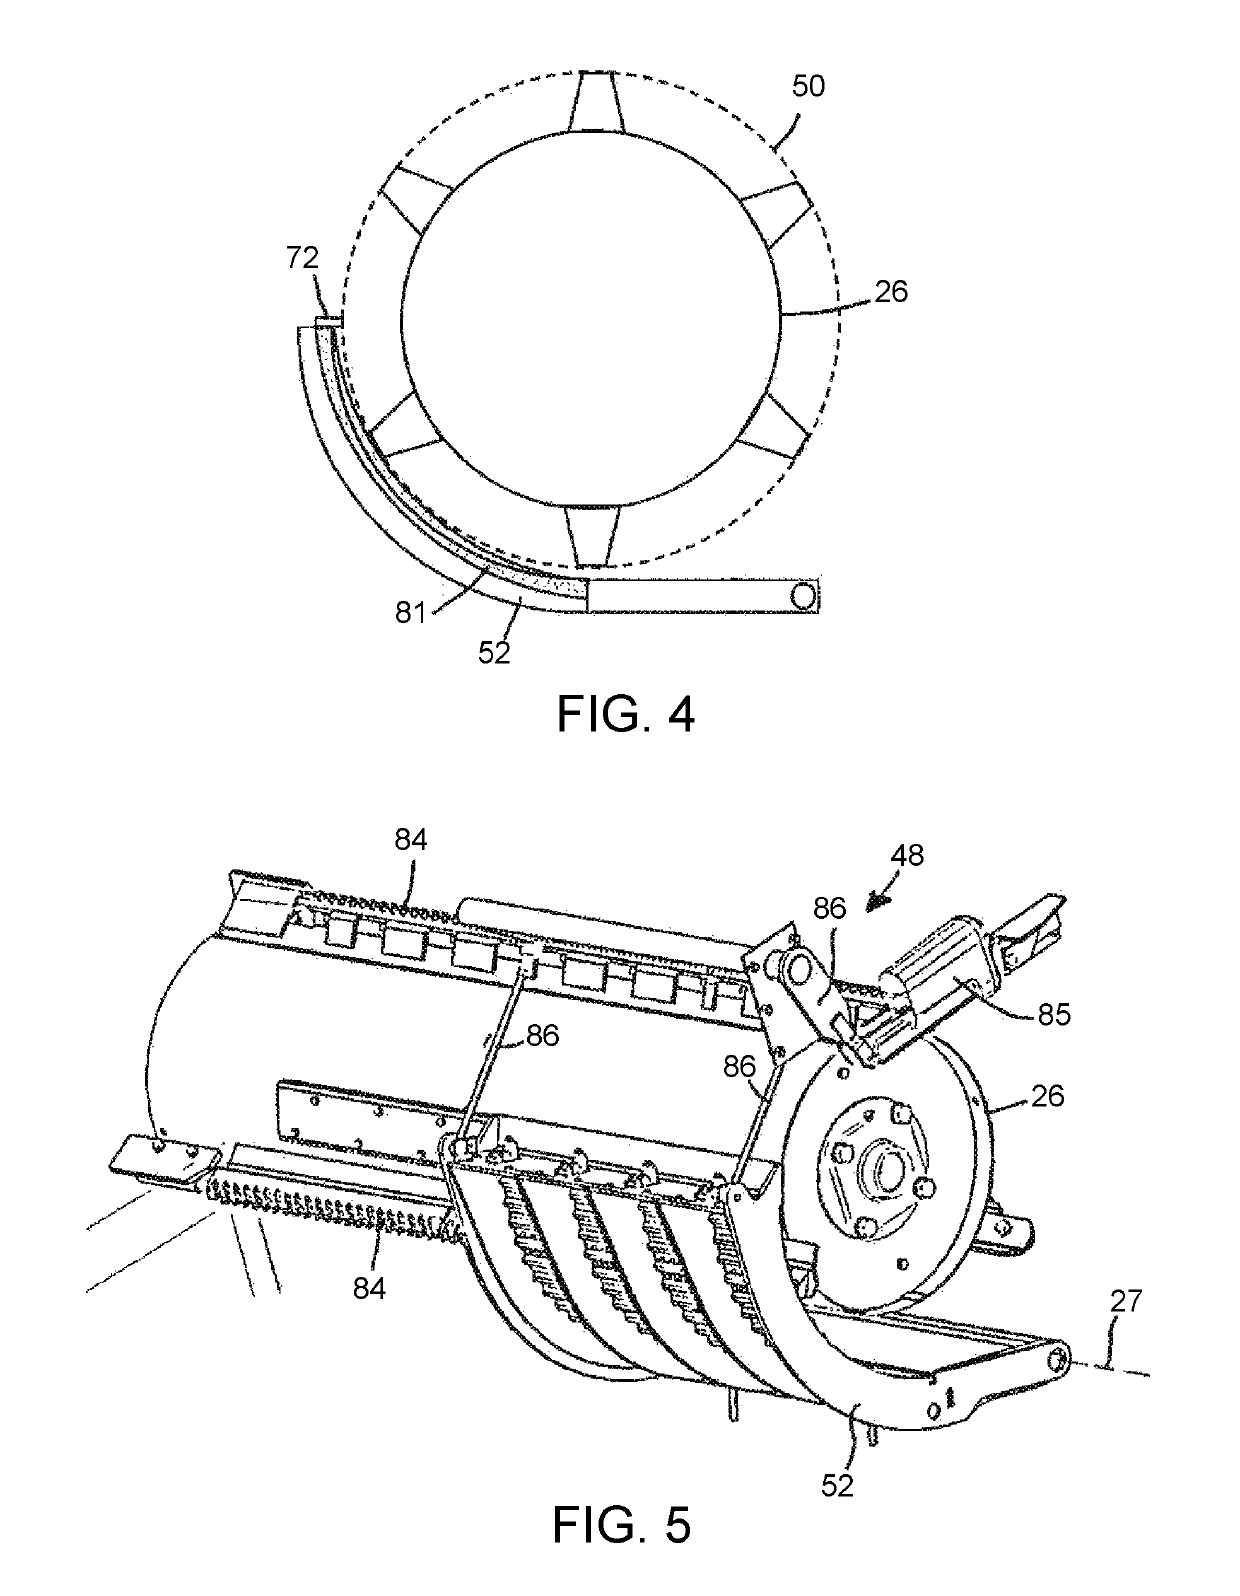 Threshing apparatus in a combine harvester having a multiposition stop device for setting clearance of concave grate segment